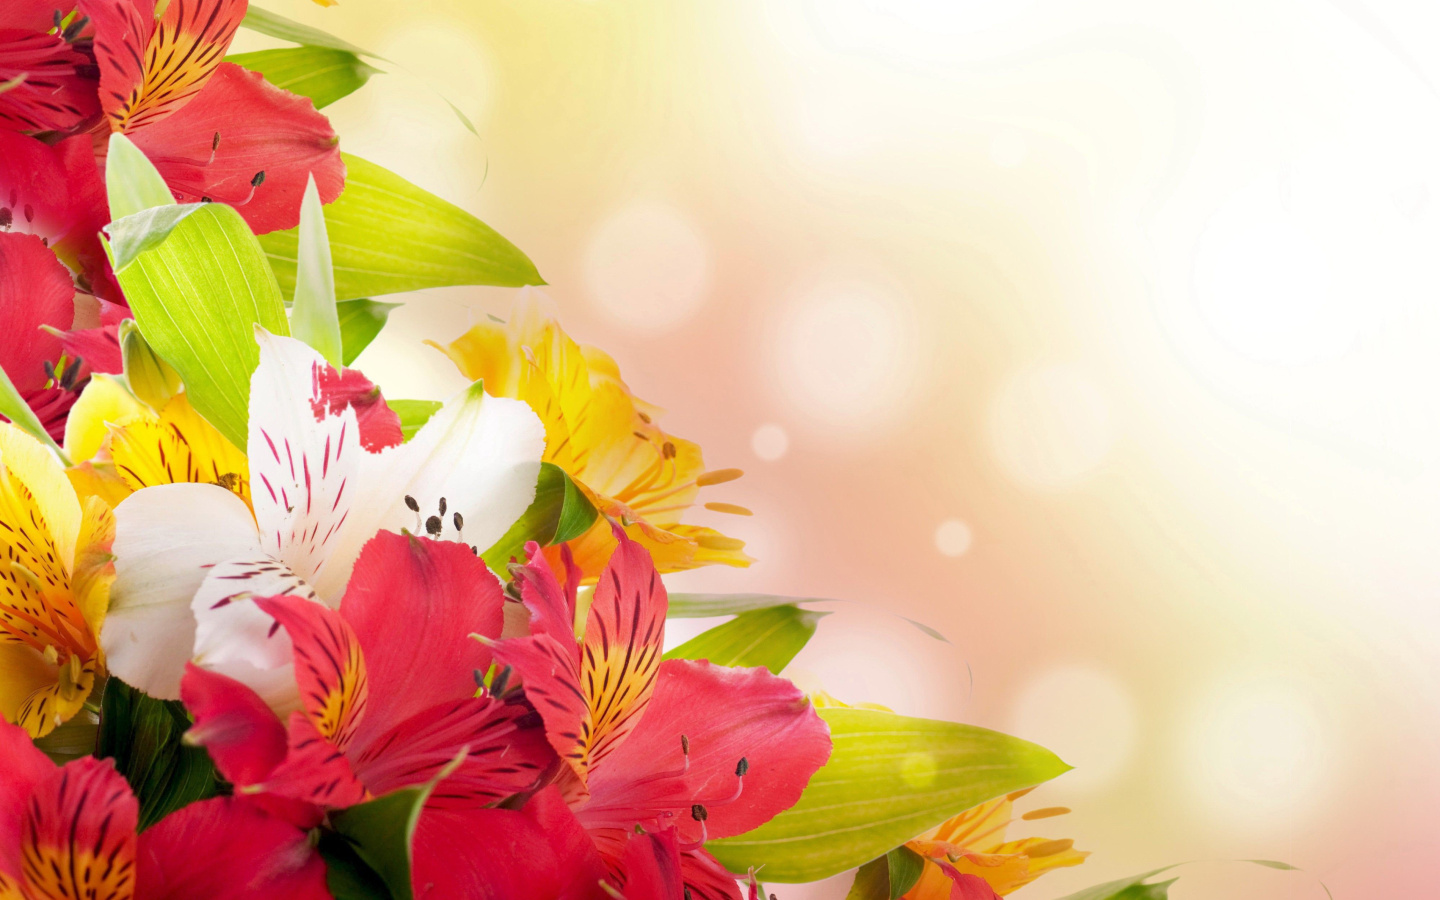 Flowers for the holiday of March 8 wallpaper 1440x900